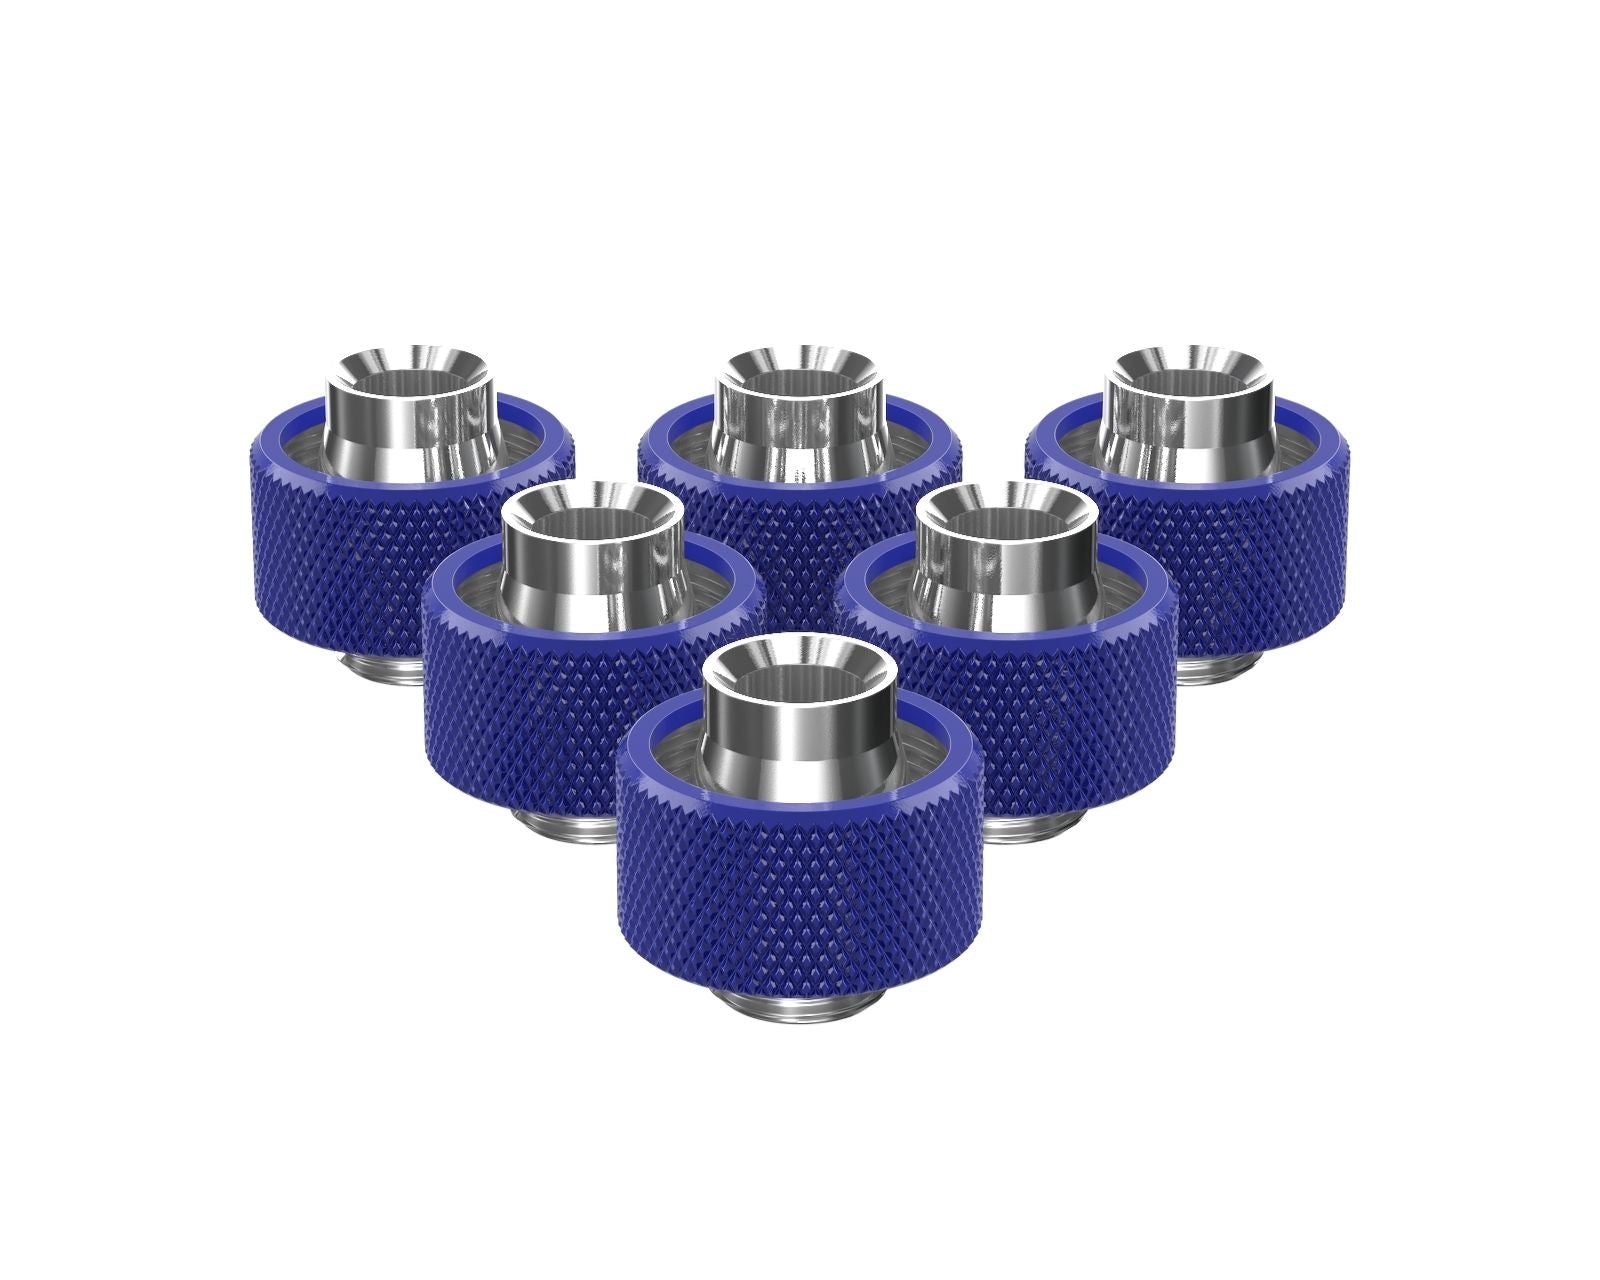 PrimoChill SecureFit SX - Premium Compression Fittings 6 Pack - For 1/2in ID x 3/4in OD Flexible Tubing (F-SFSX34-6) - Available in 20+ Colors, Custom Watercooling Loop Ready - True Blue